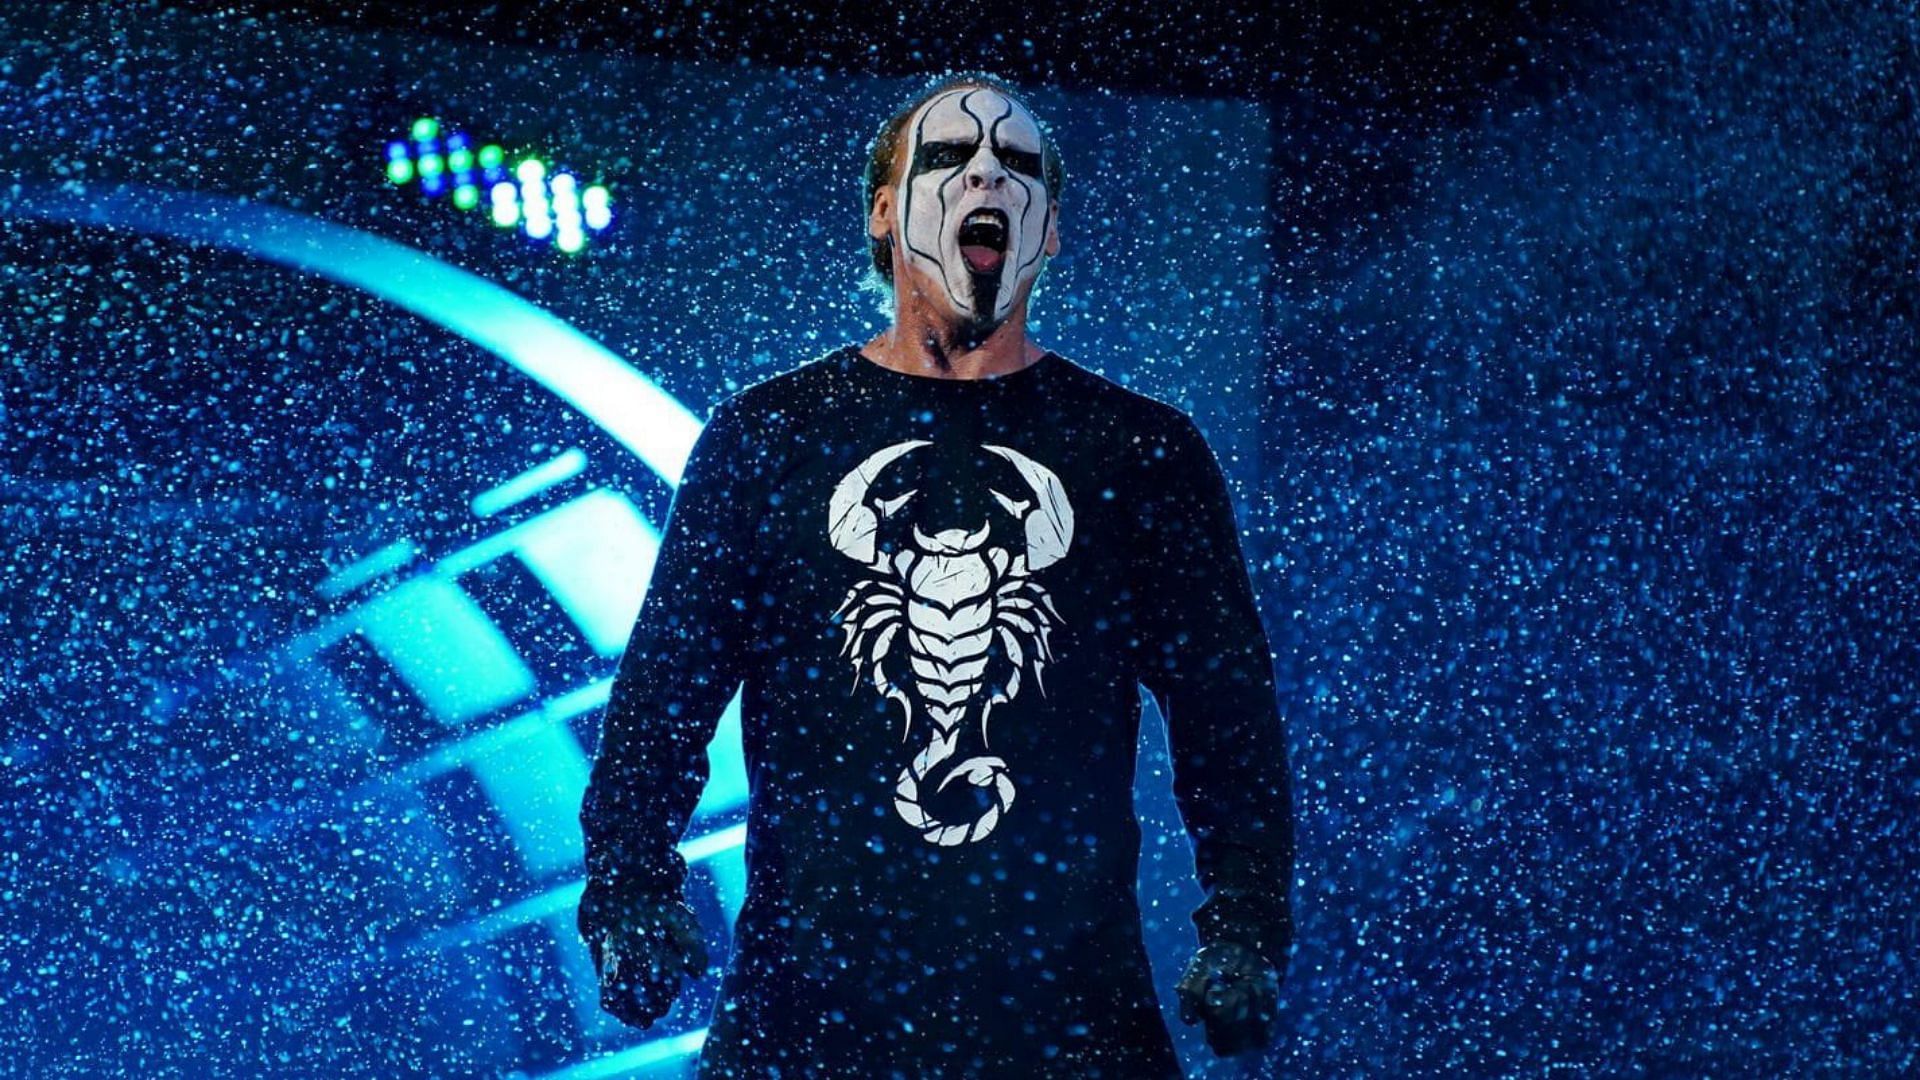 the icon sting wallpaper